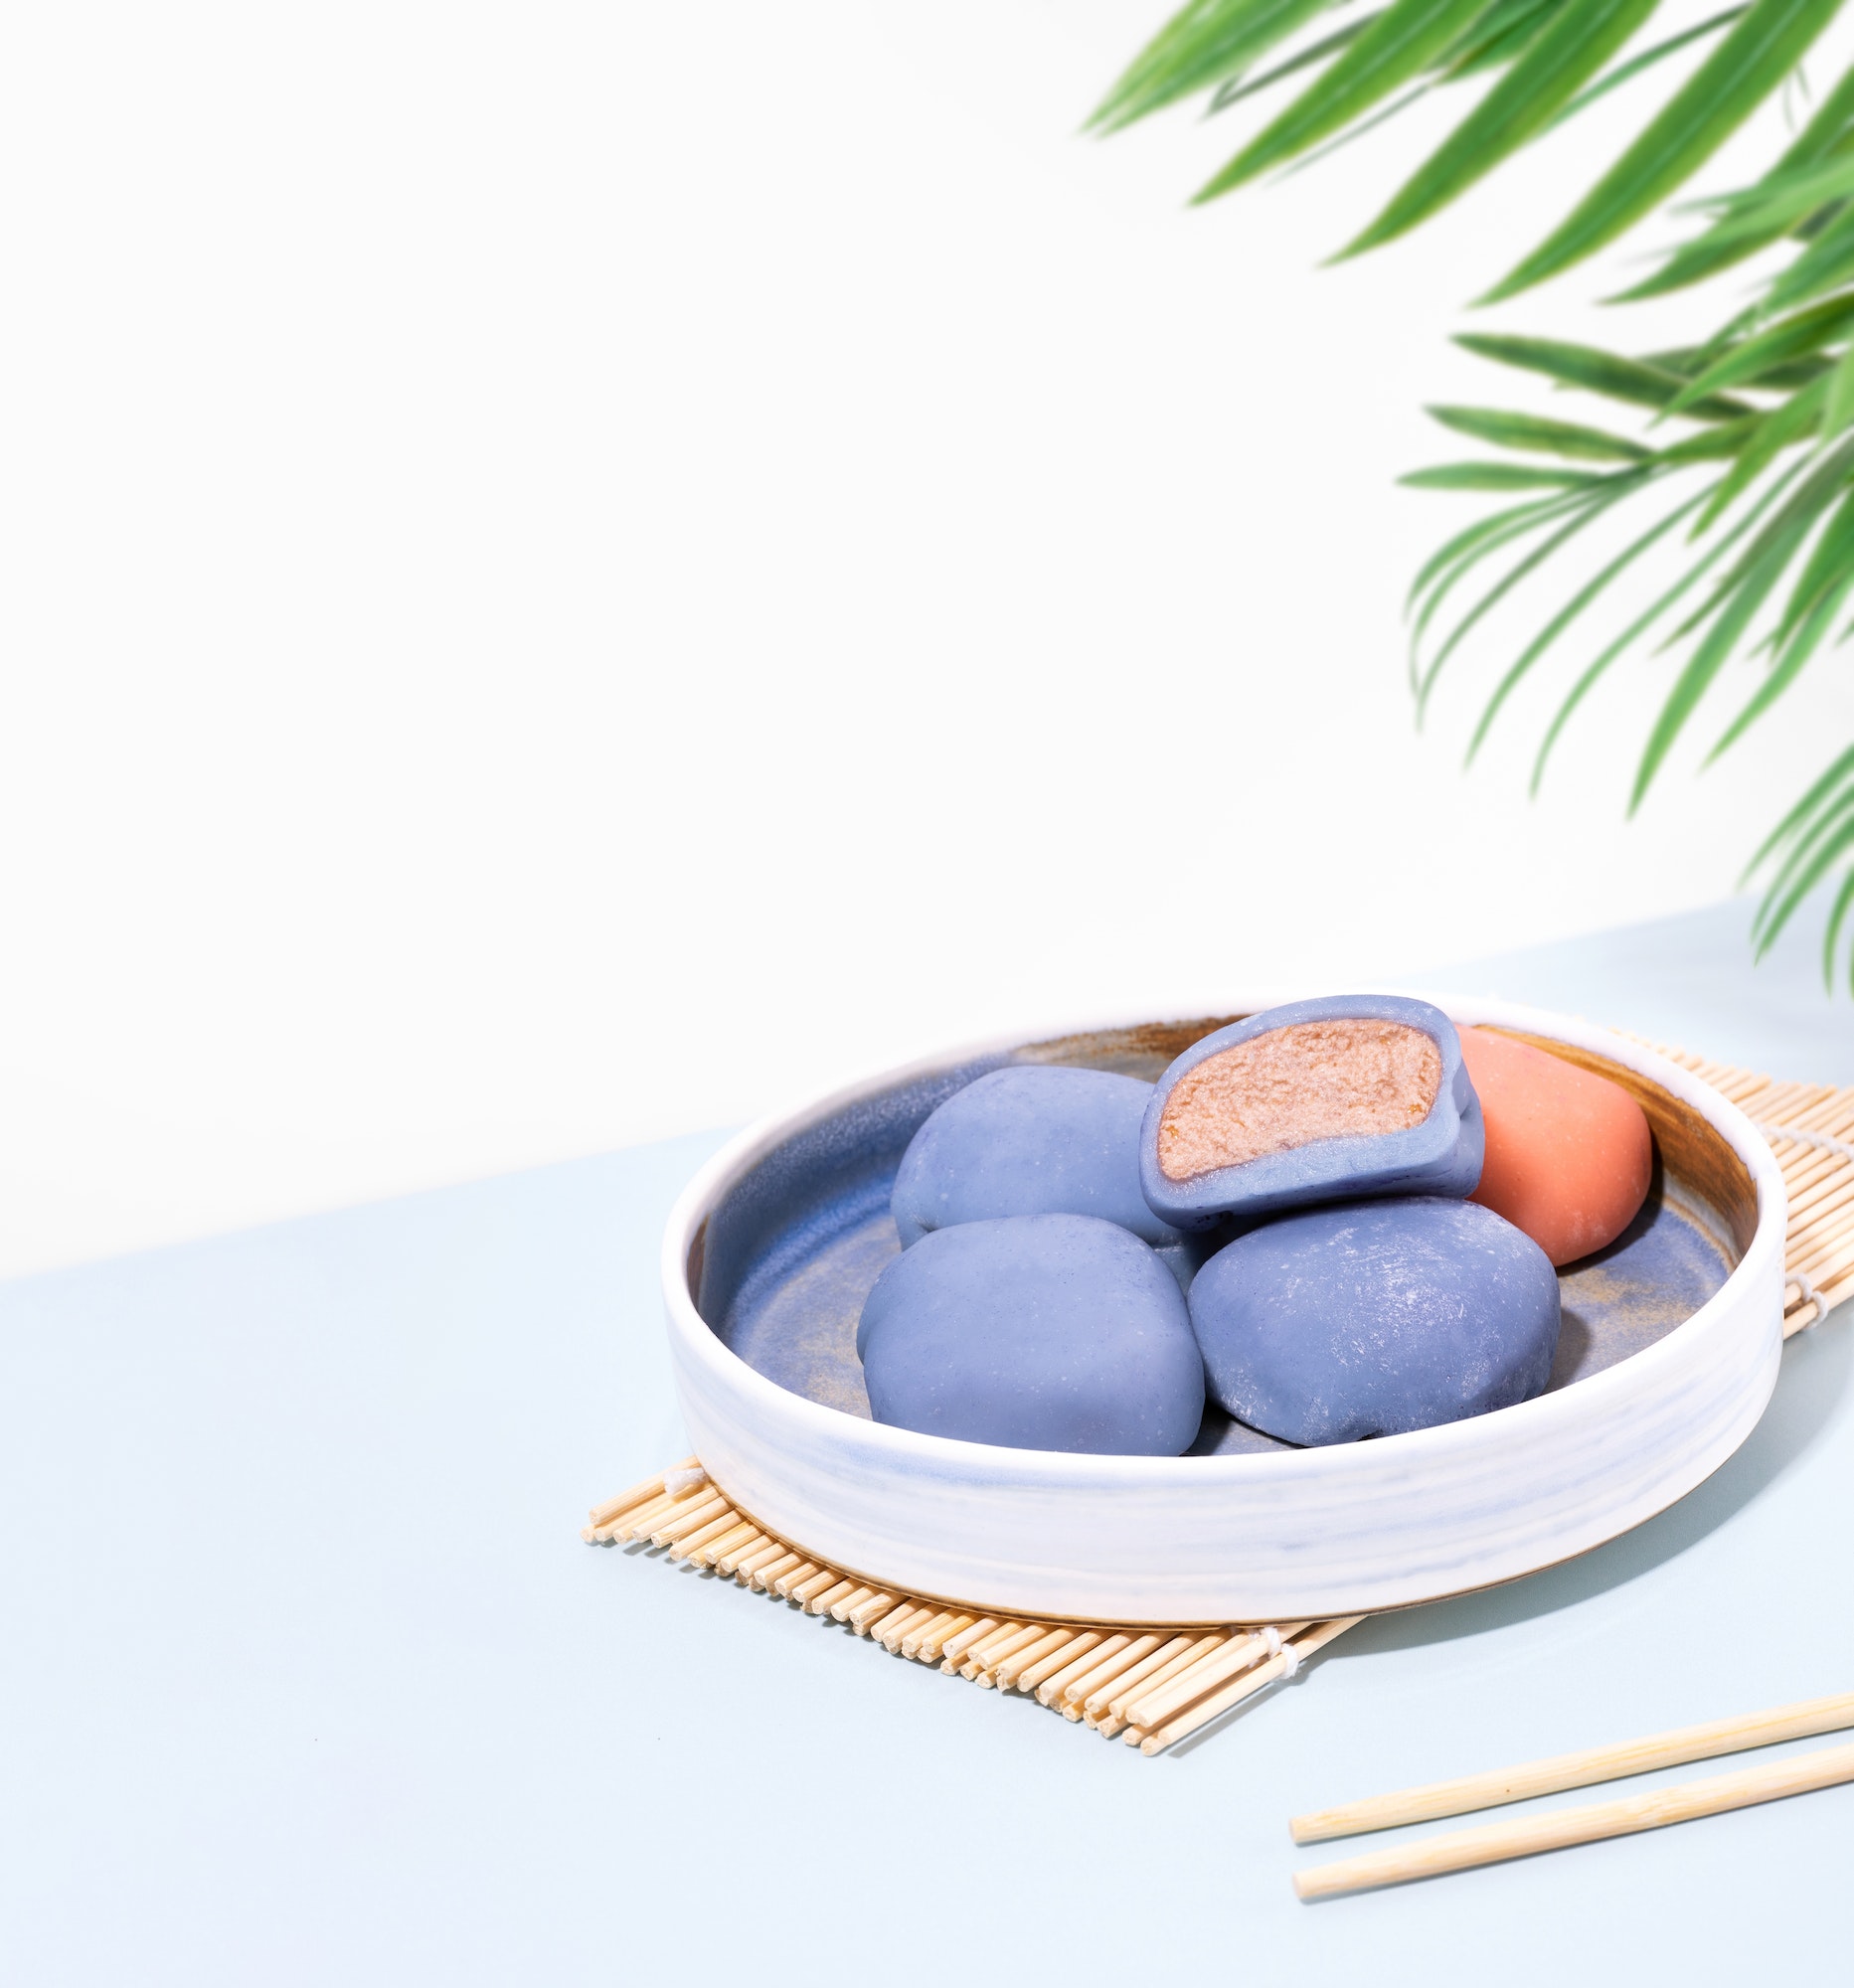 Concept of a traditional Japanese dessert on a blue table. A plate of Japanese mochi with chopsticks